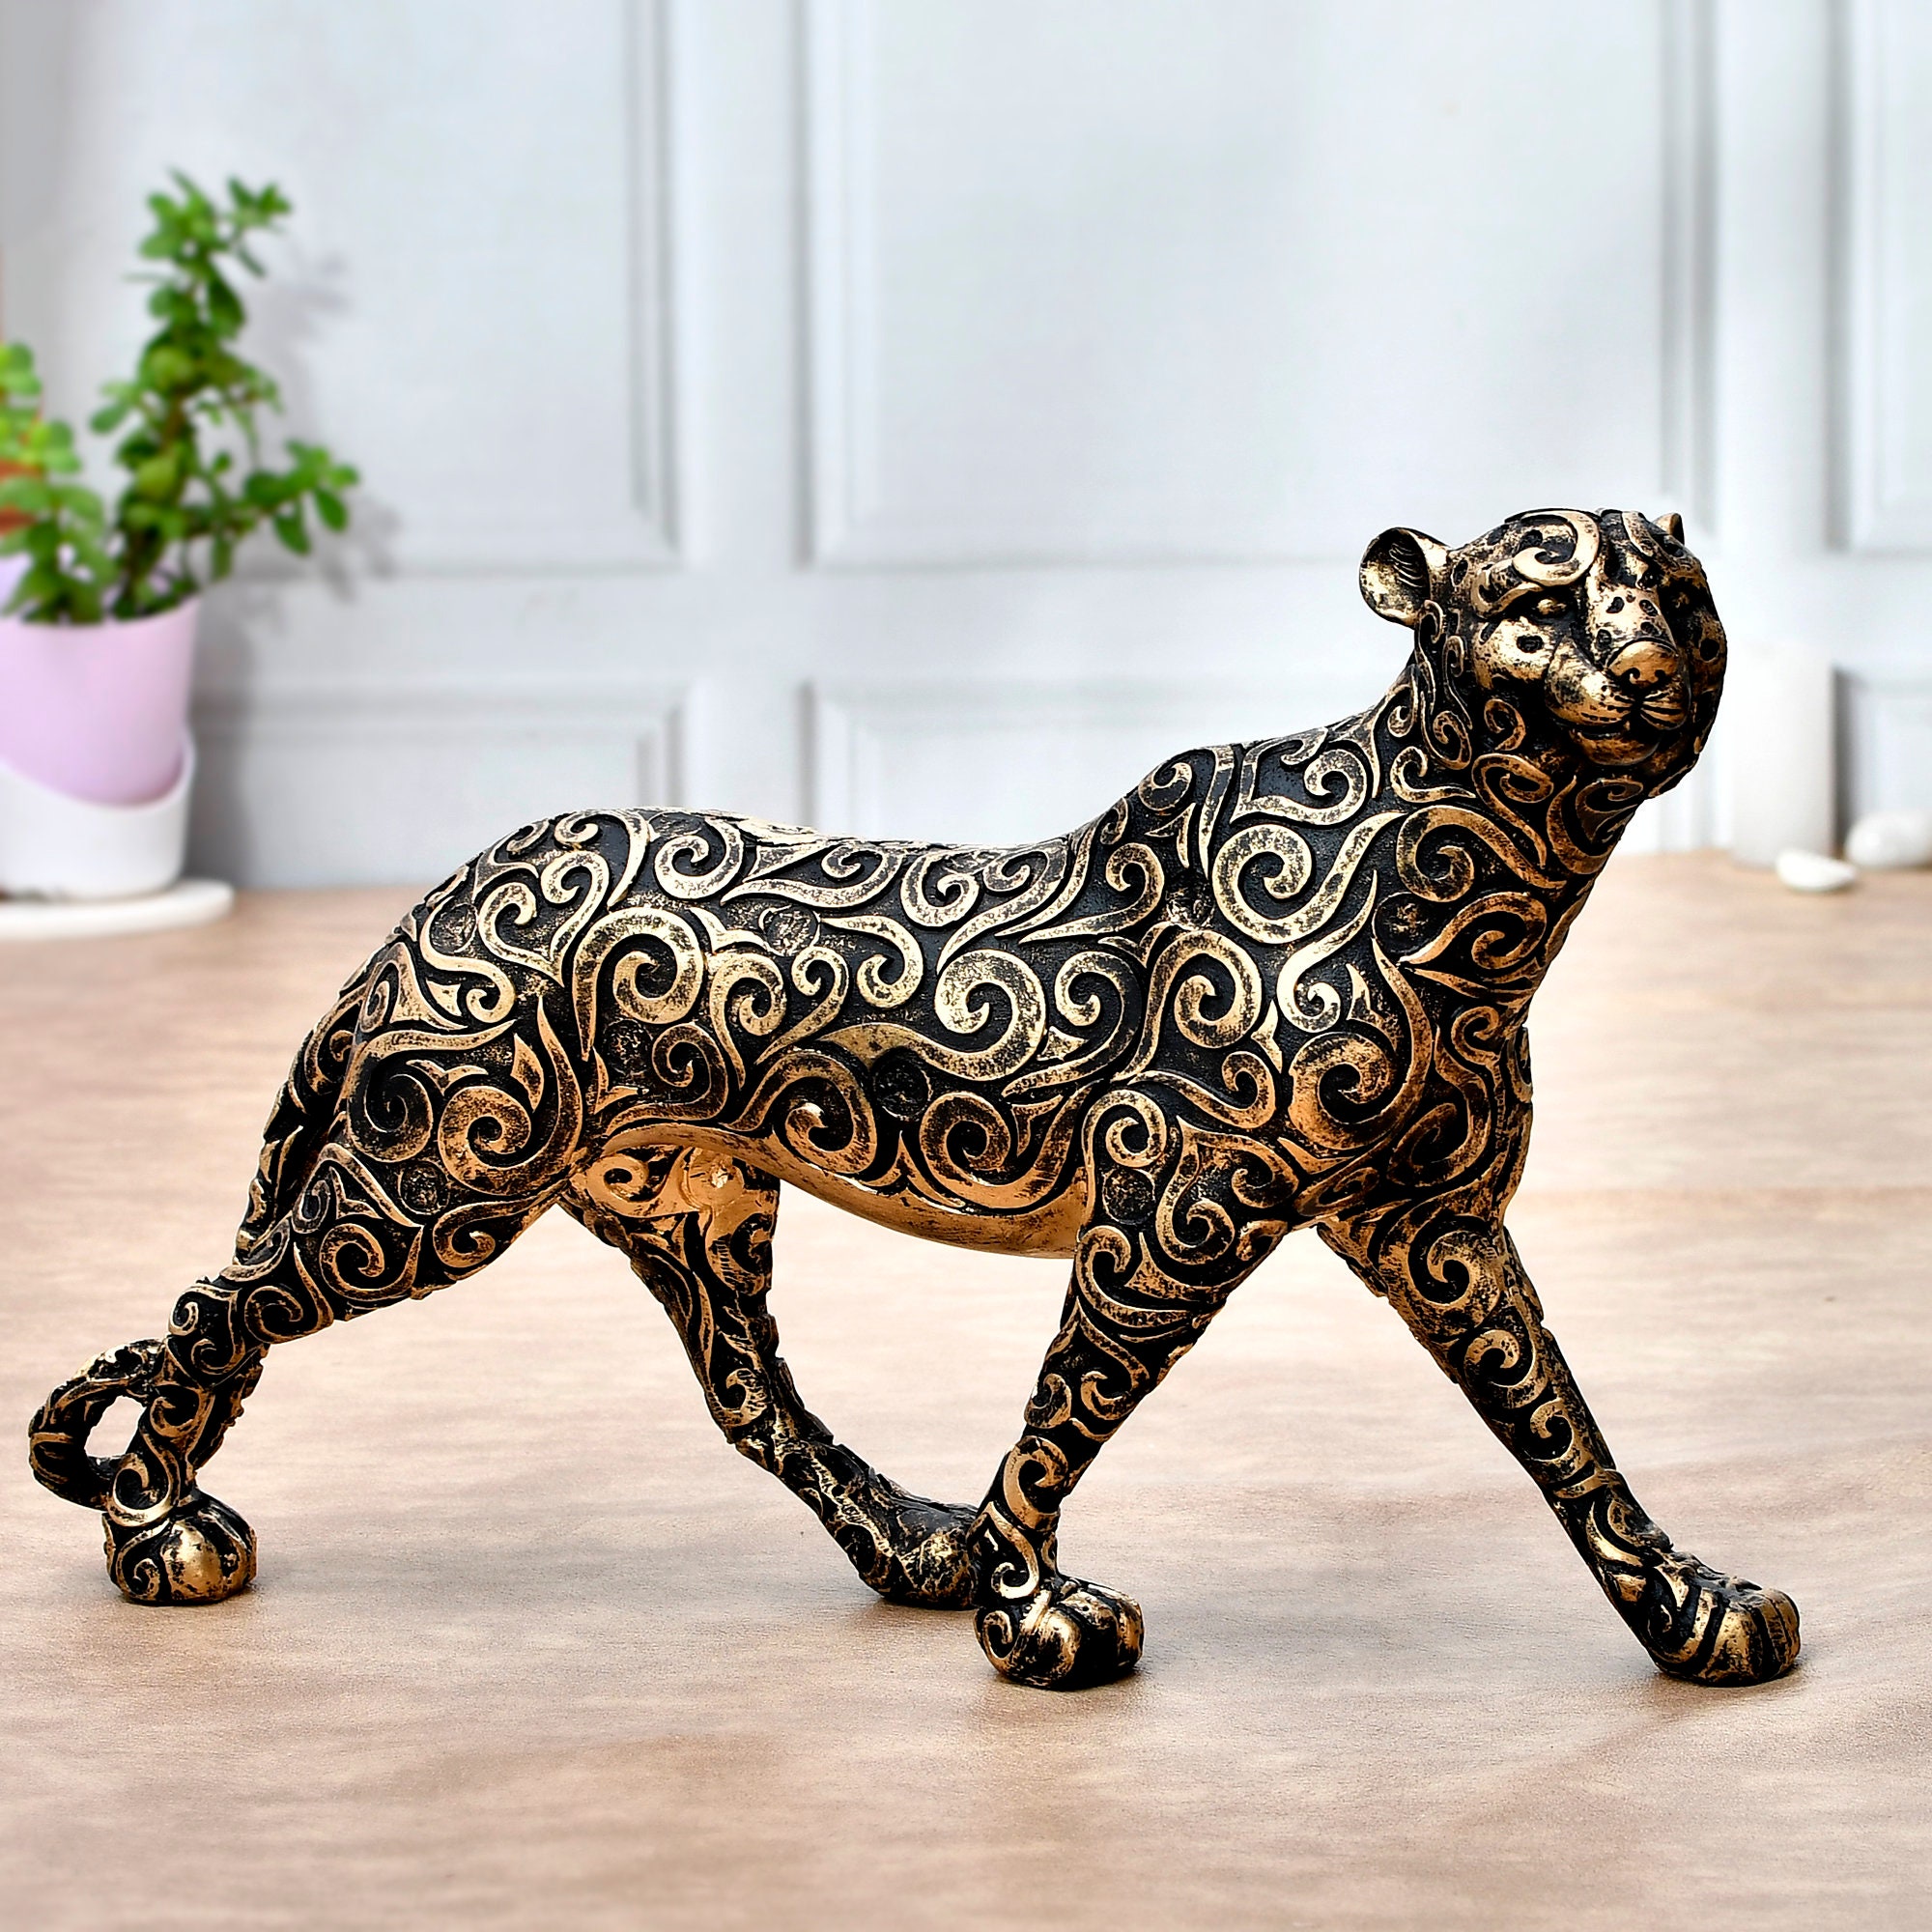 Black Leopard Statue Sitting on Table, Hand-painted Resin Leopard